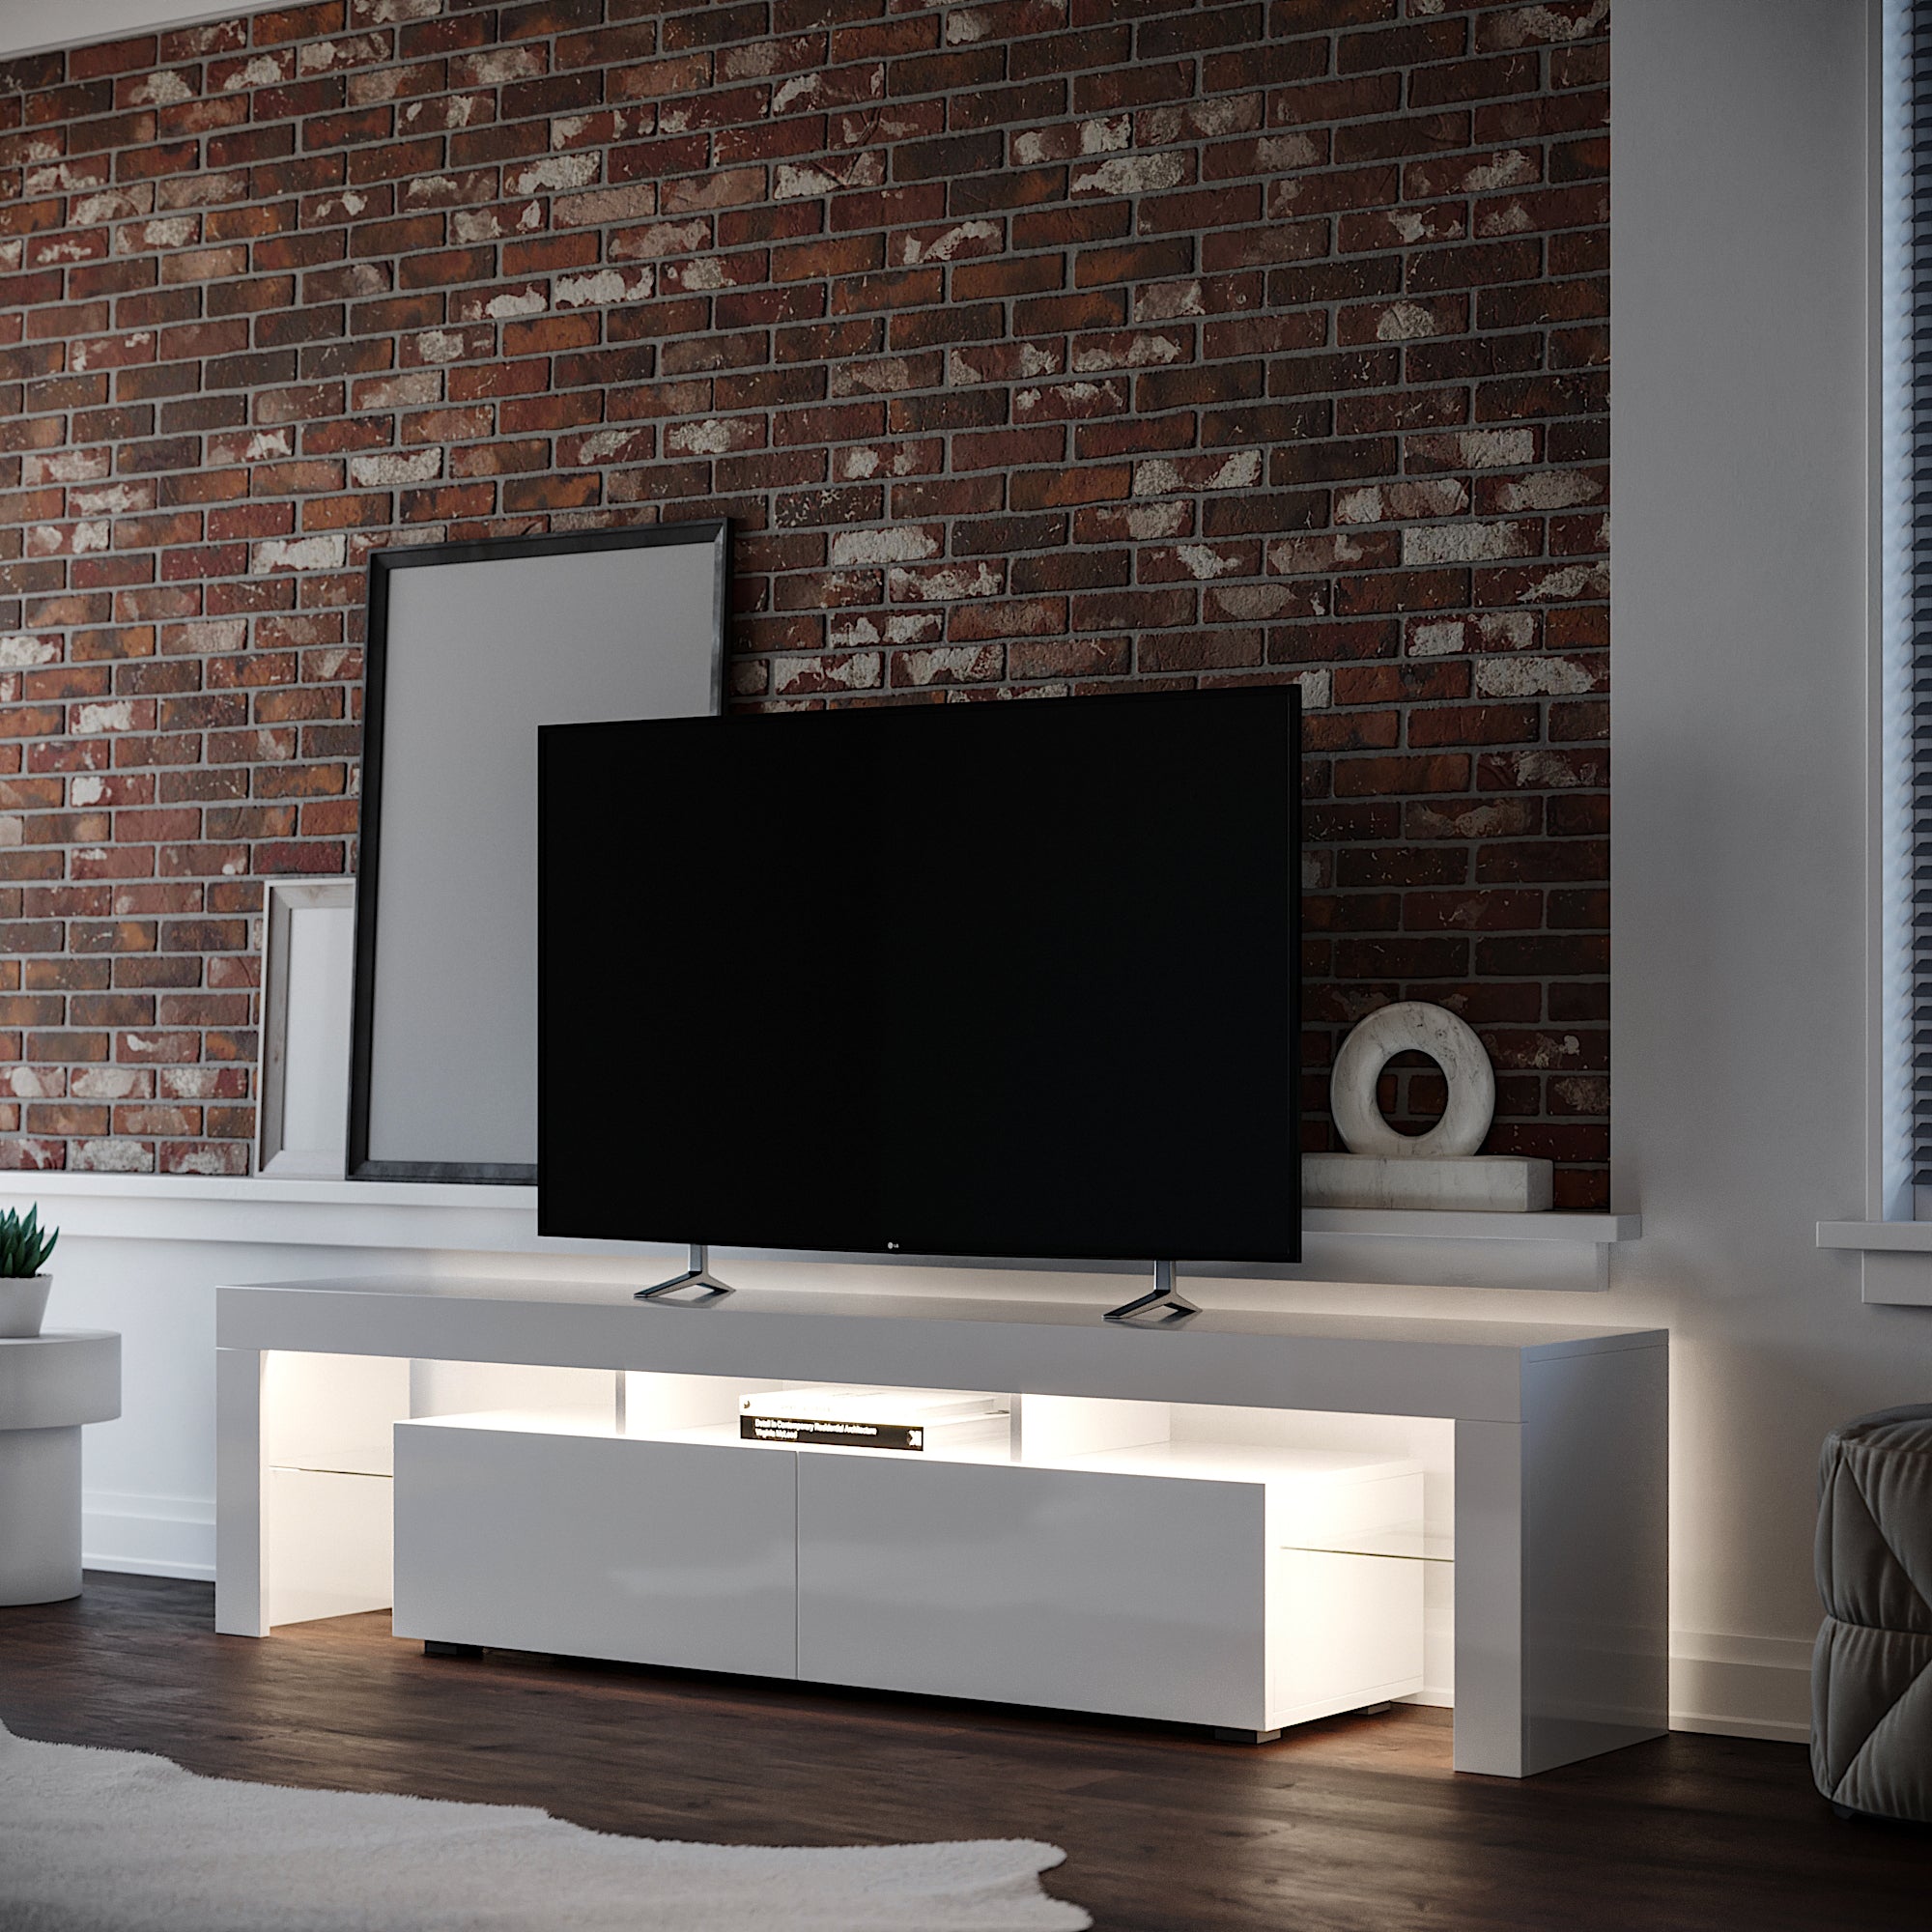 Copenhagen White TV Stand with Flat screen TV and warm white LED Lighting the media unit